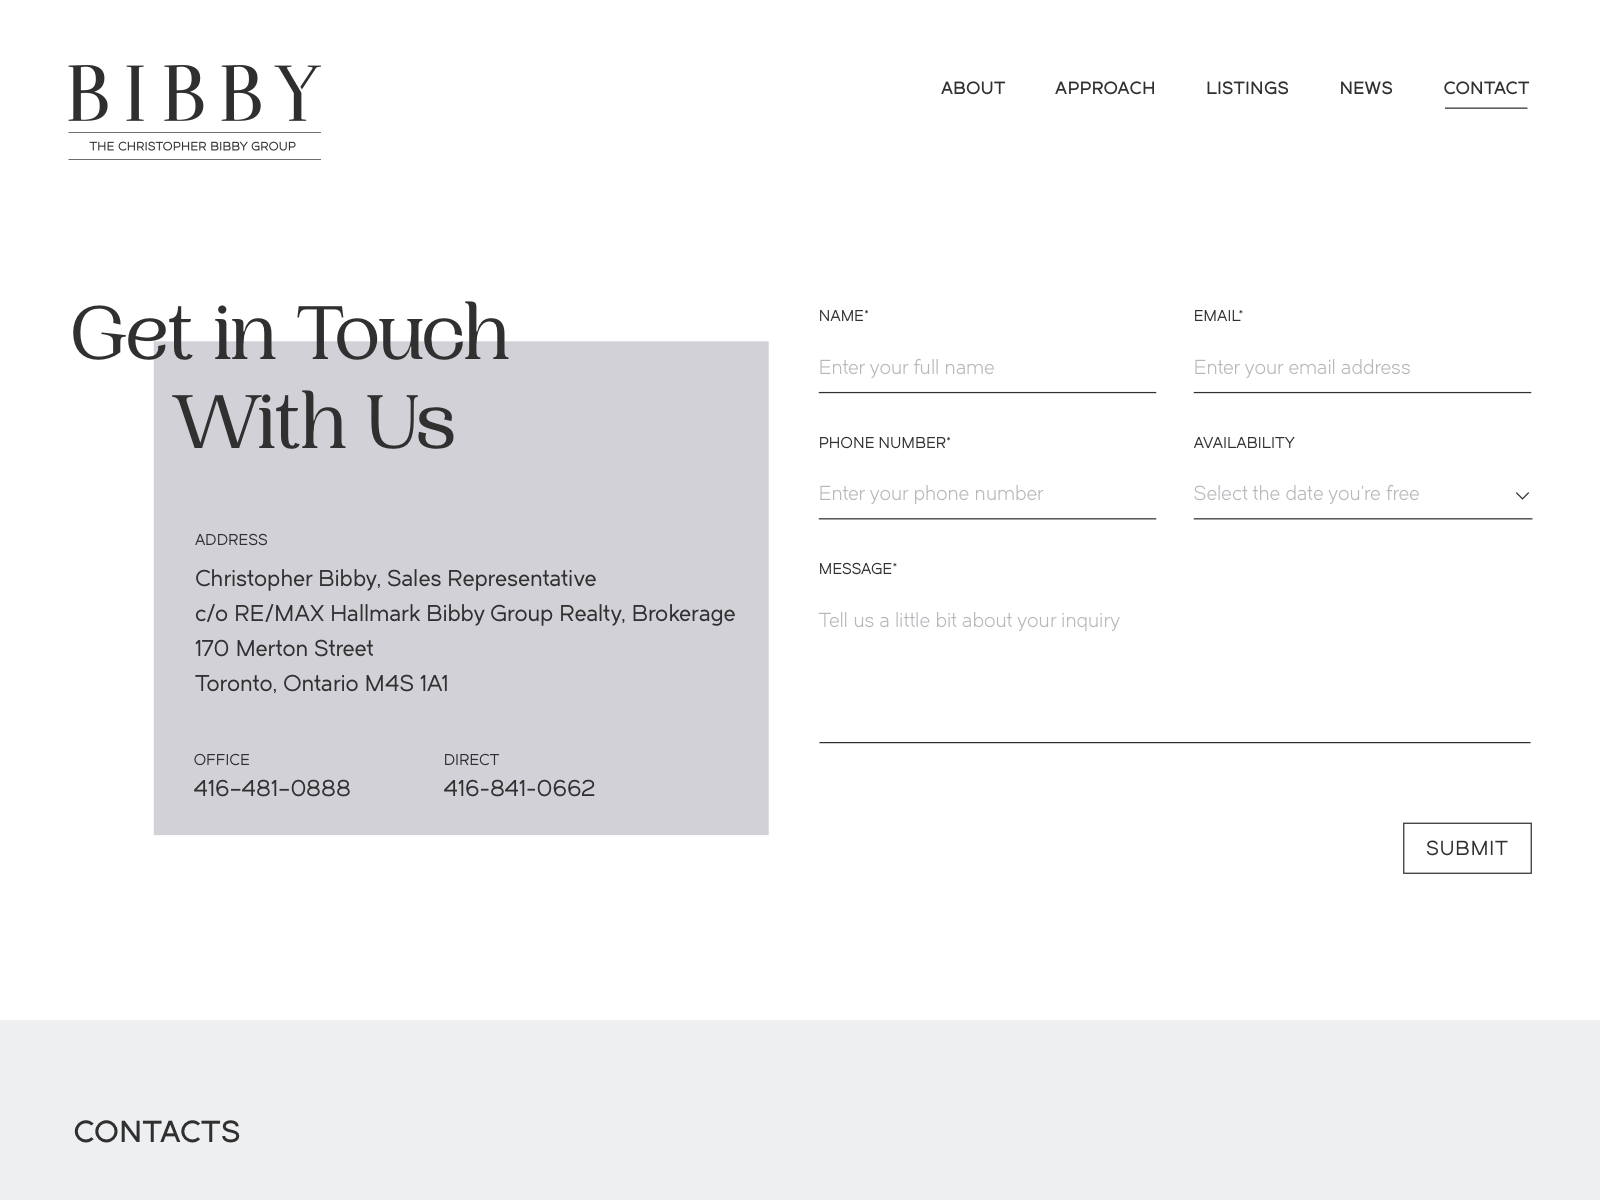 Bibby Website Contact Page